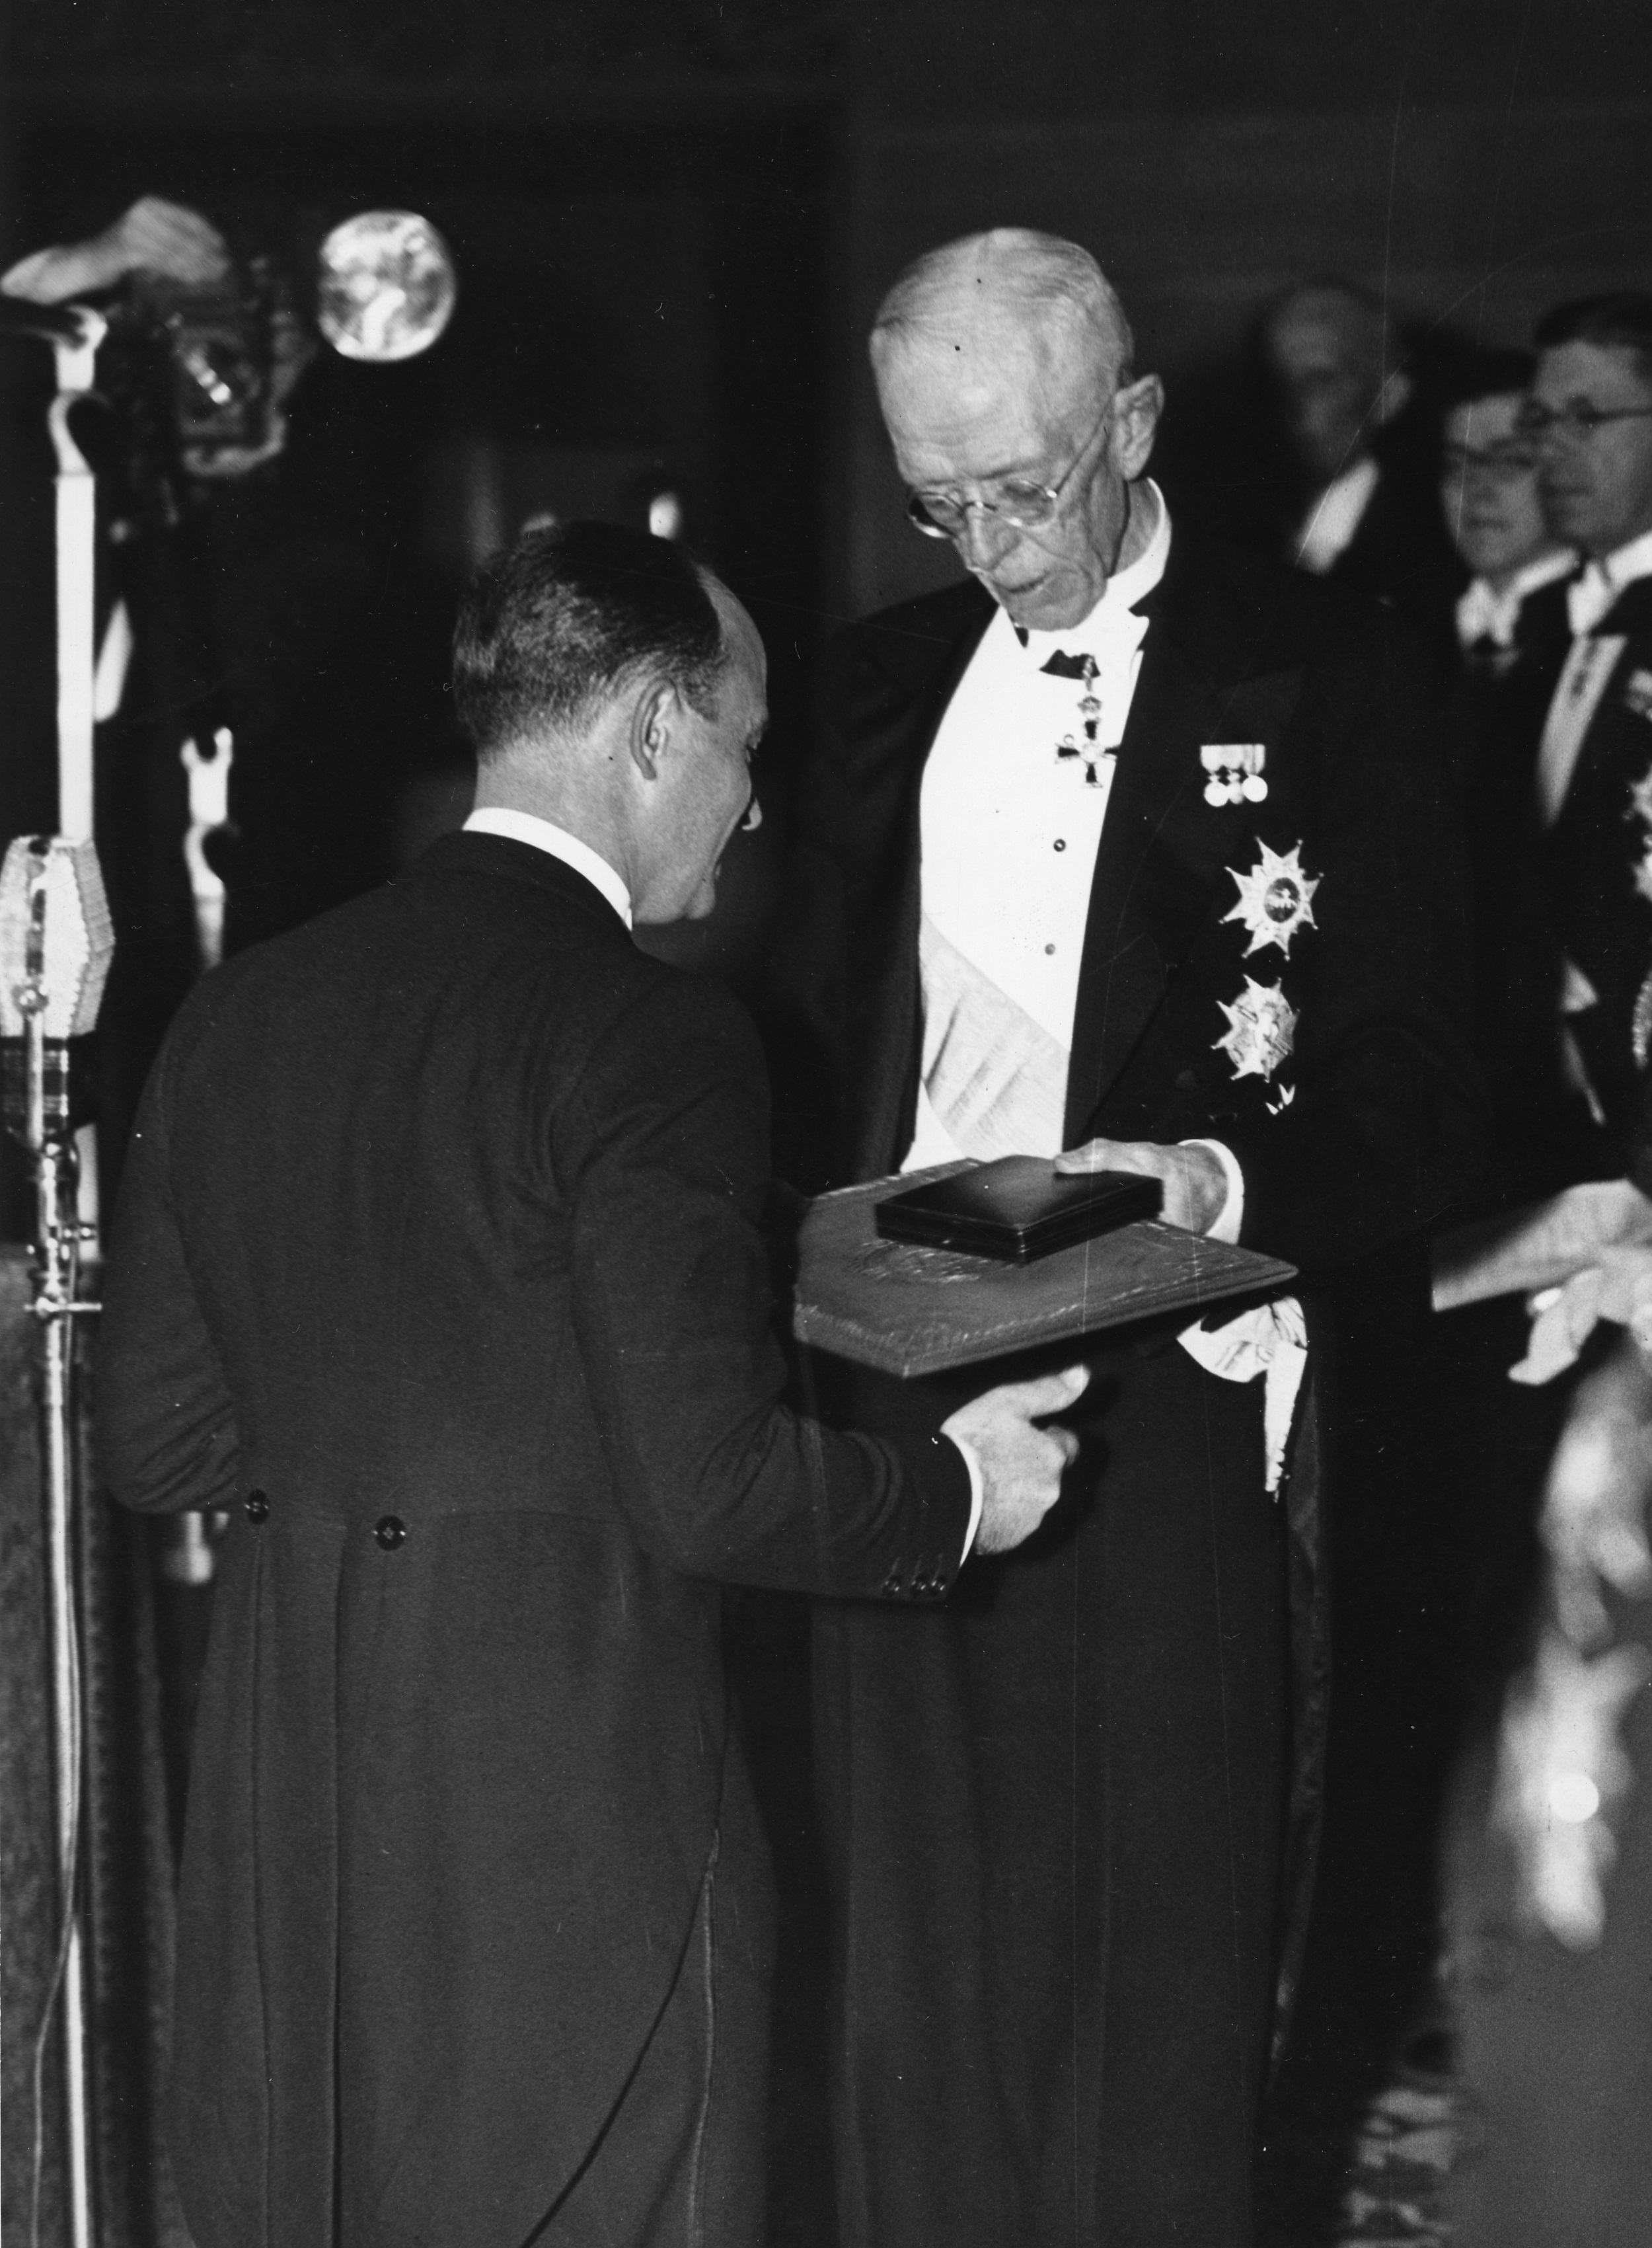 Fermi receives the Nobel Prize from the King of Sweden, 1938